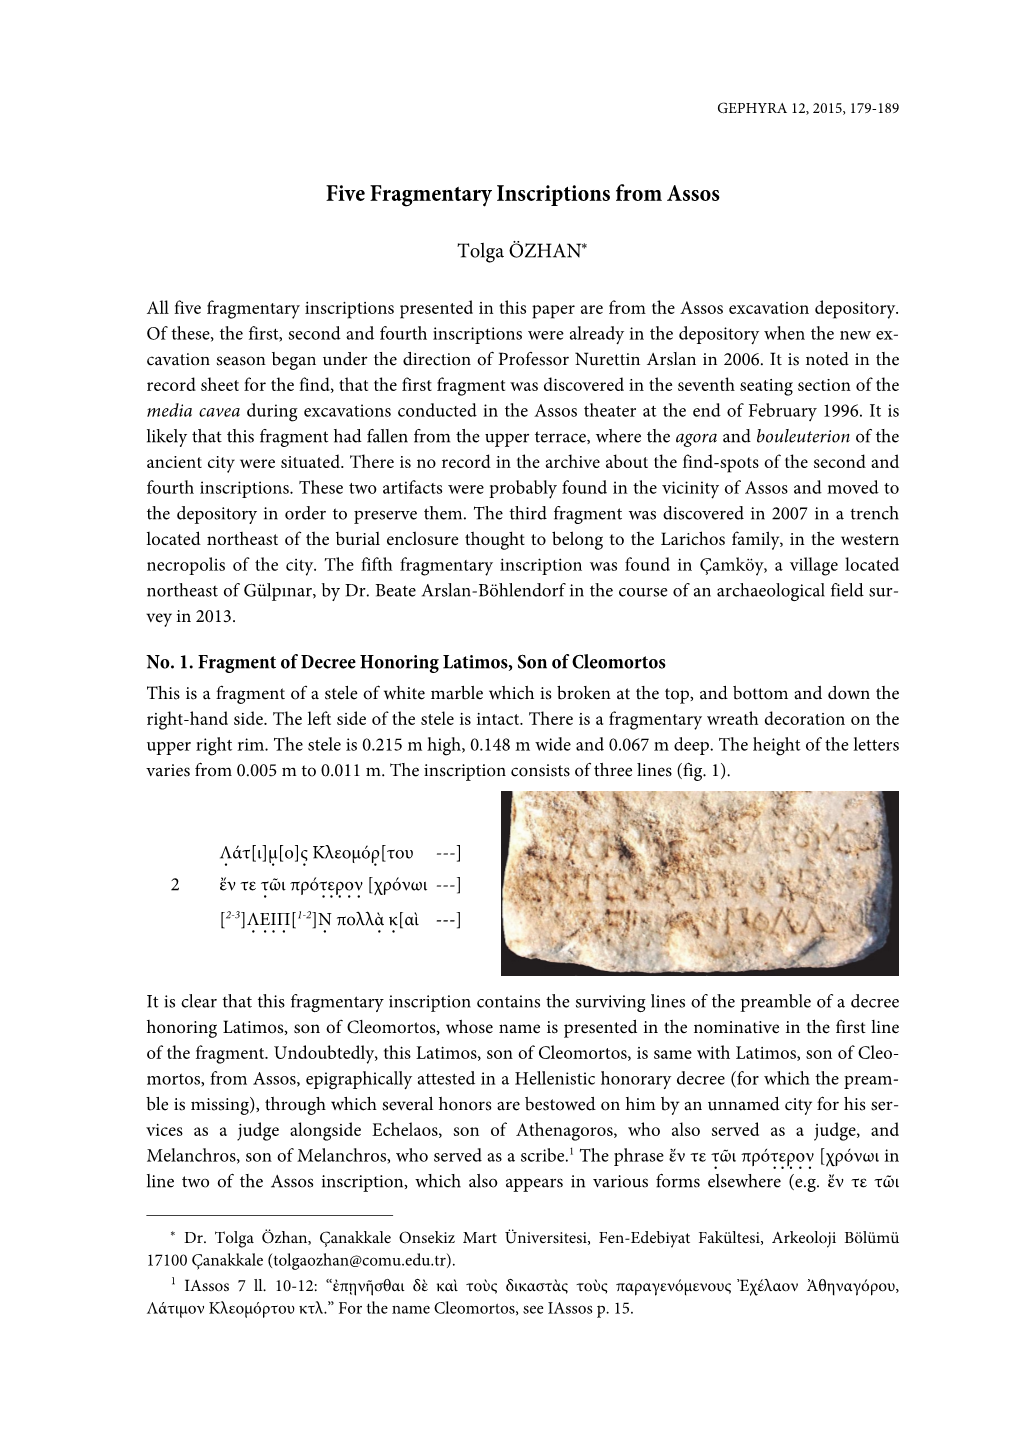 Five Fragmentary Inscriptions from Assos